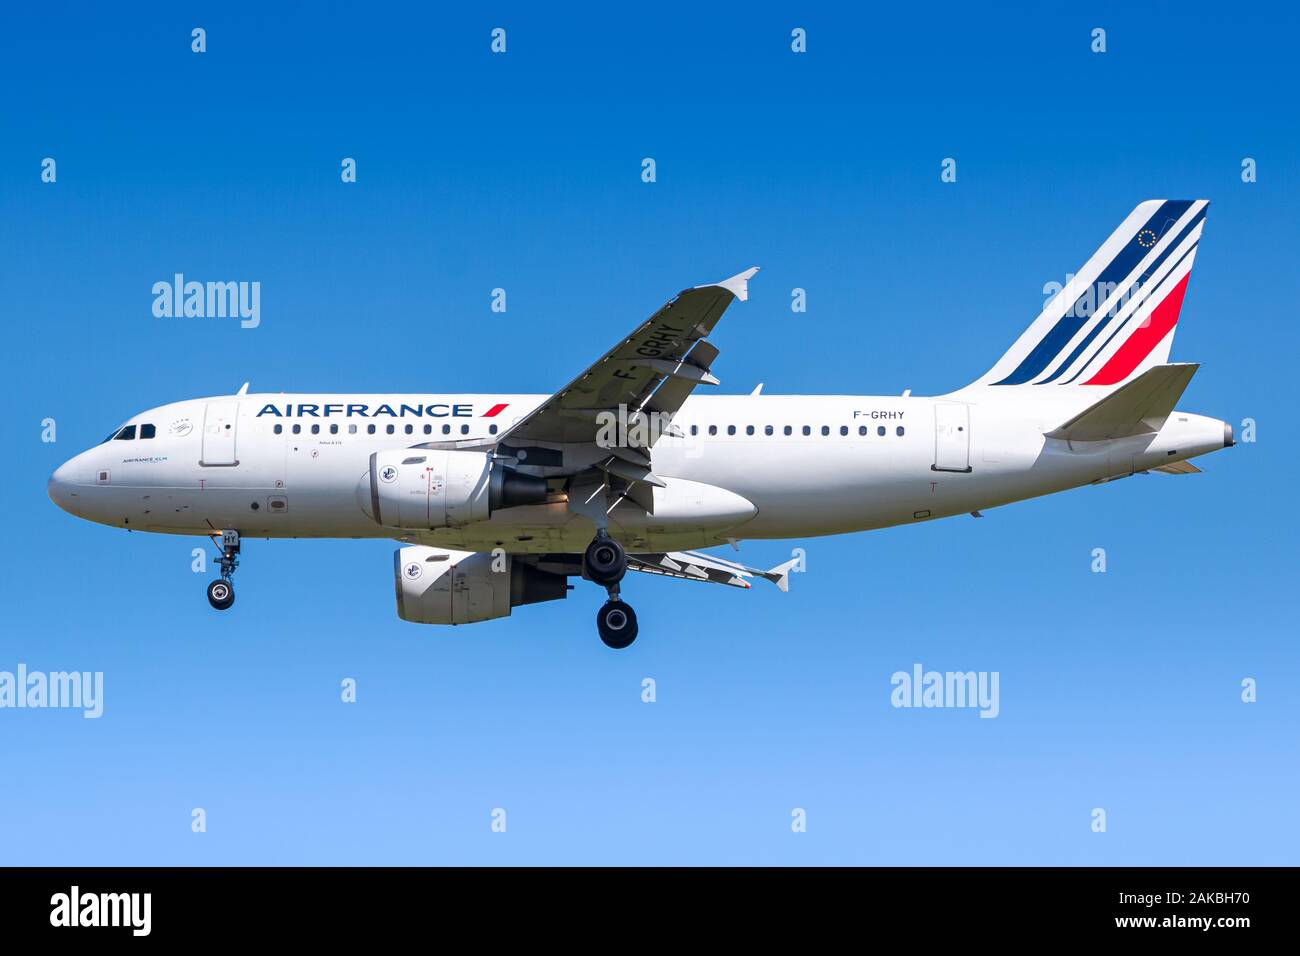 Paris, France - August 17, 2018: Air France Airbus A319 airplane at Paris Charles de Gaulle airport (CDG) in France. Airbus is an aircraft manufacture Stock Photo